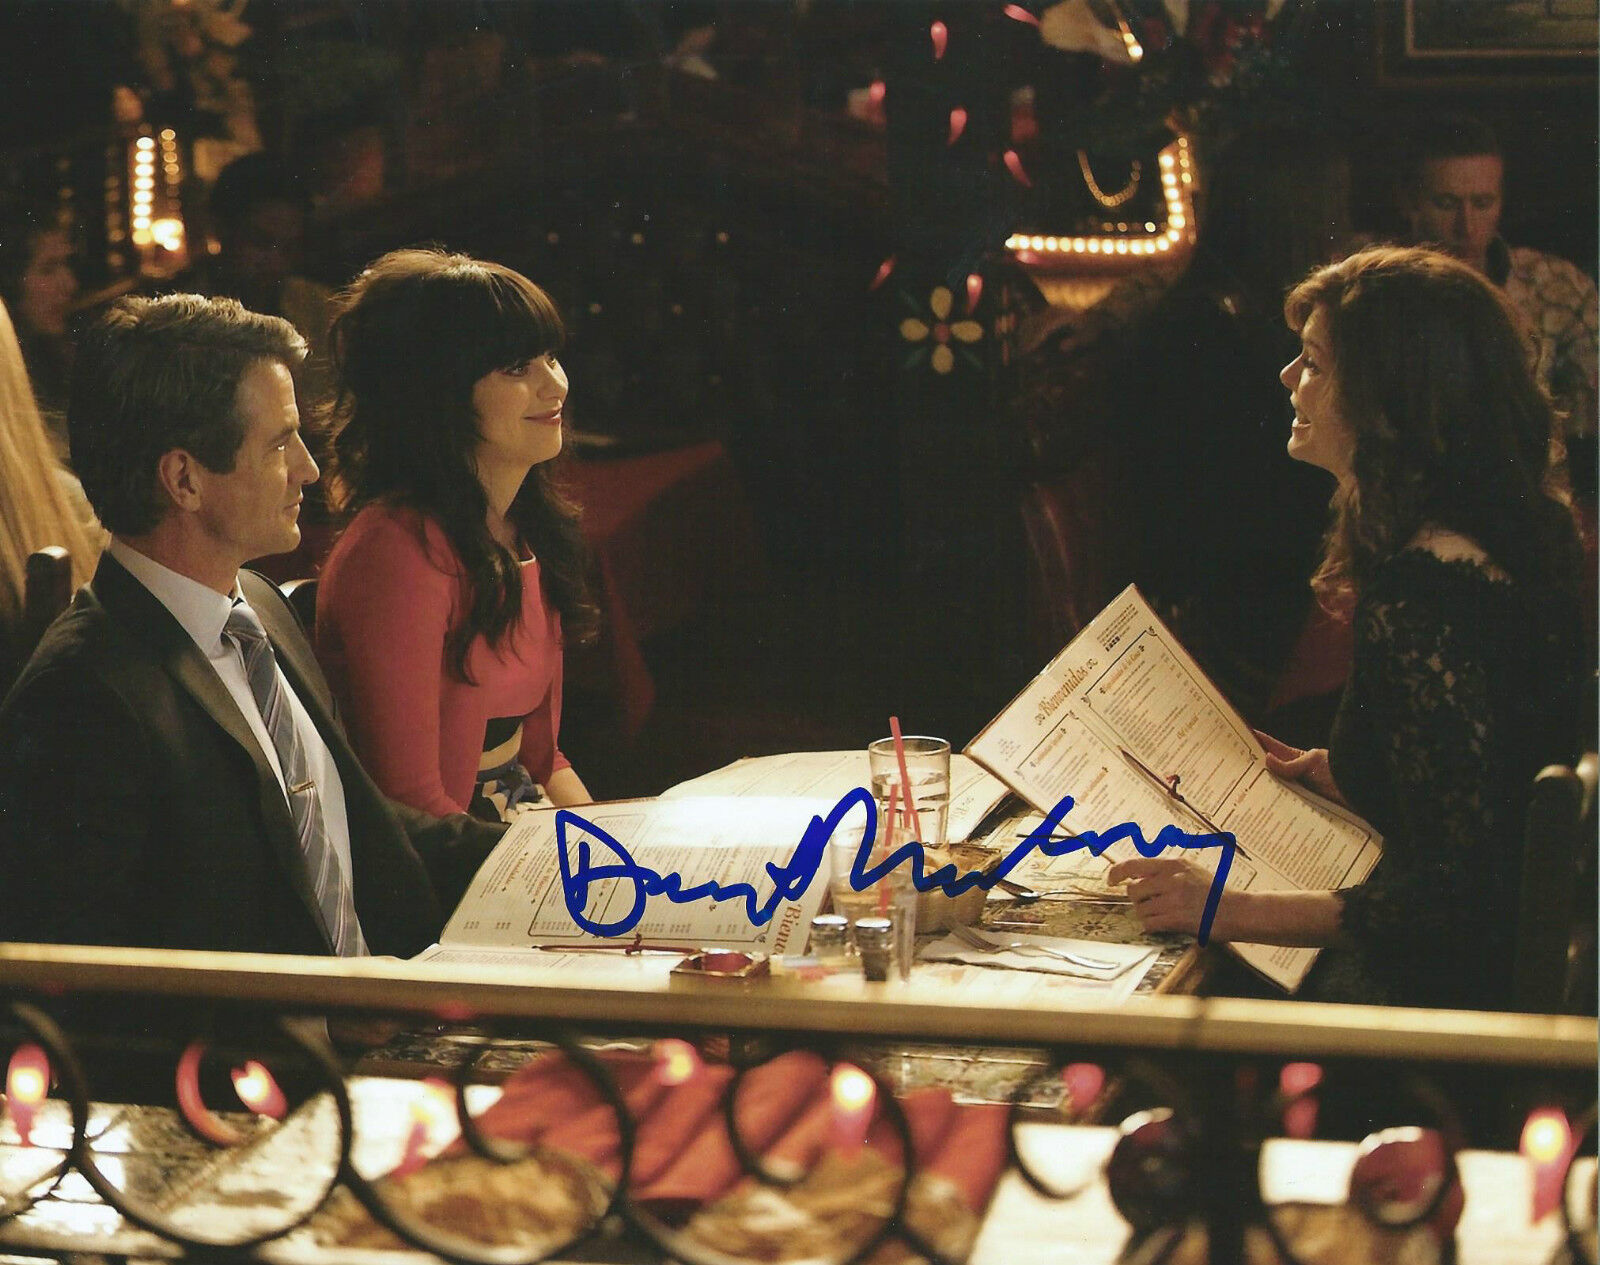 **GFA New Girl-Russell *DERMOT MULRONEY* Signed 8x10 Photo Poster painting MH3 COA**